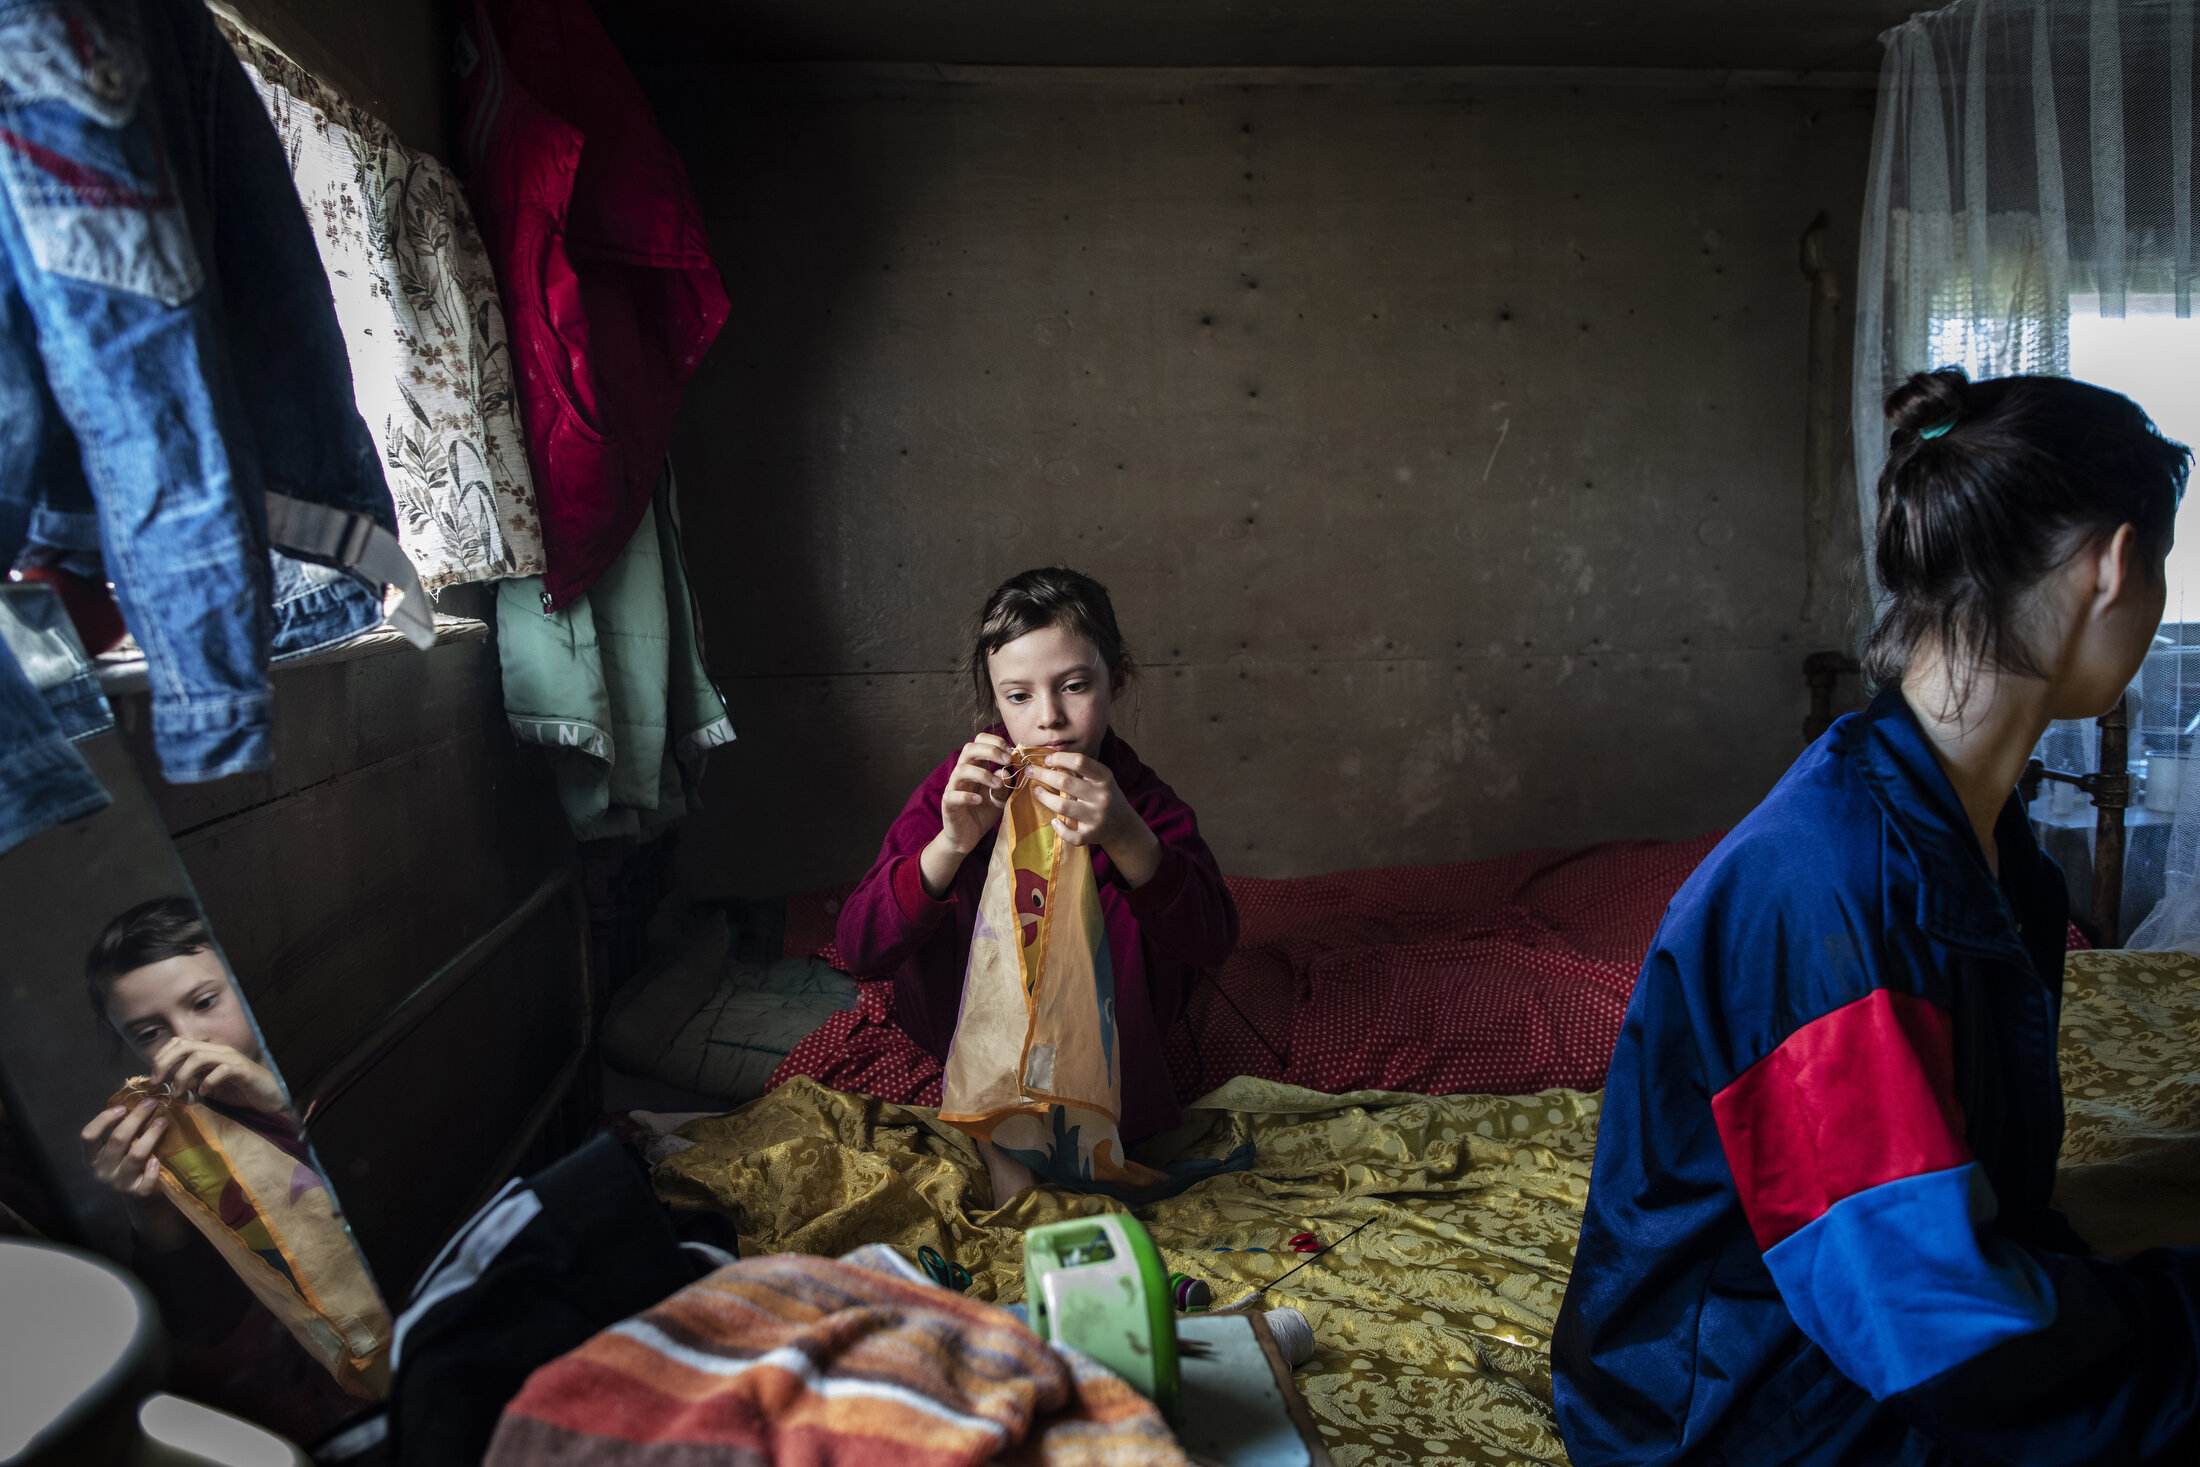  Edic's daughters at their cabin outside of Chersky, Siberia. Families in this region depend on fishing and hunting as dietary staples, and struggle to keep their fish and meat fresh with their ice cellars, or freezers, that are dug into the permafro